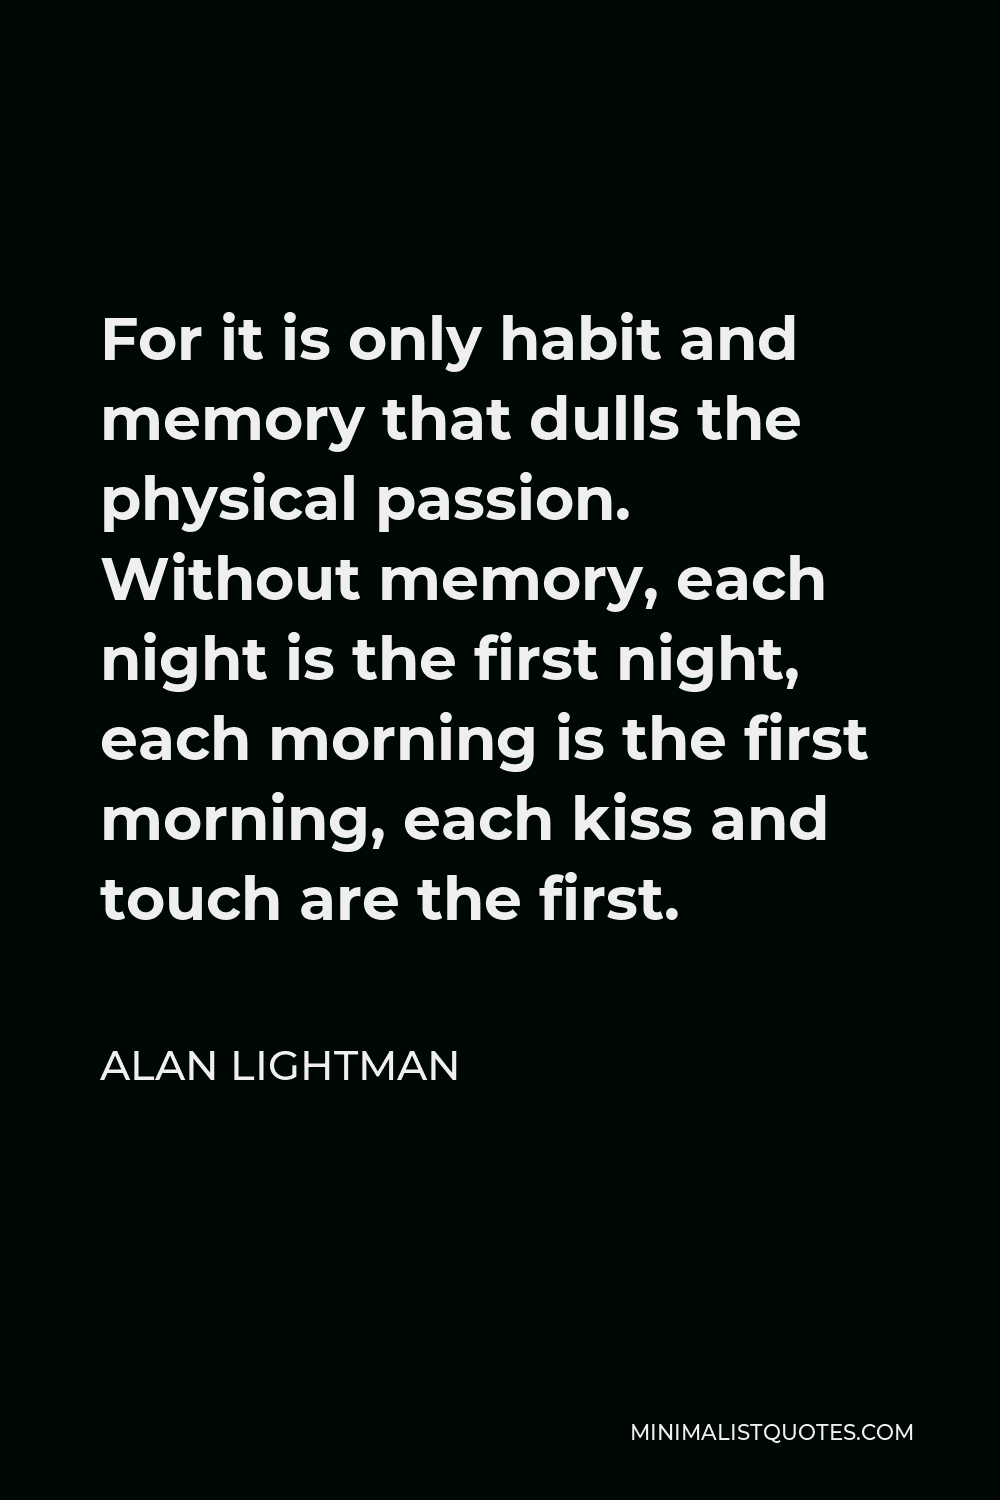 Alan Lightman Quote - For it is only habit and memory that dulls the physical passion. Without memory, each night is the first night, each morning is the first morning, each kiss and touch are the first.